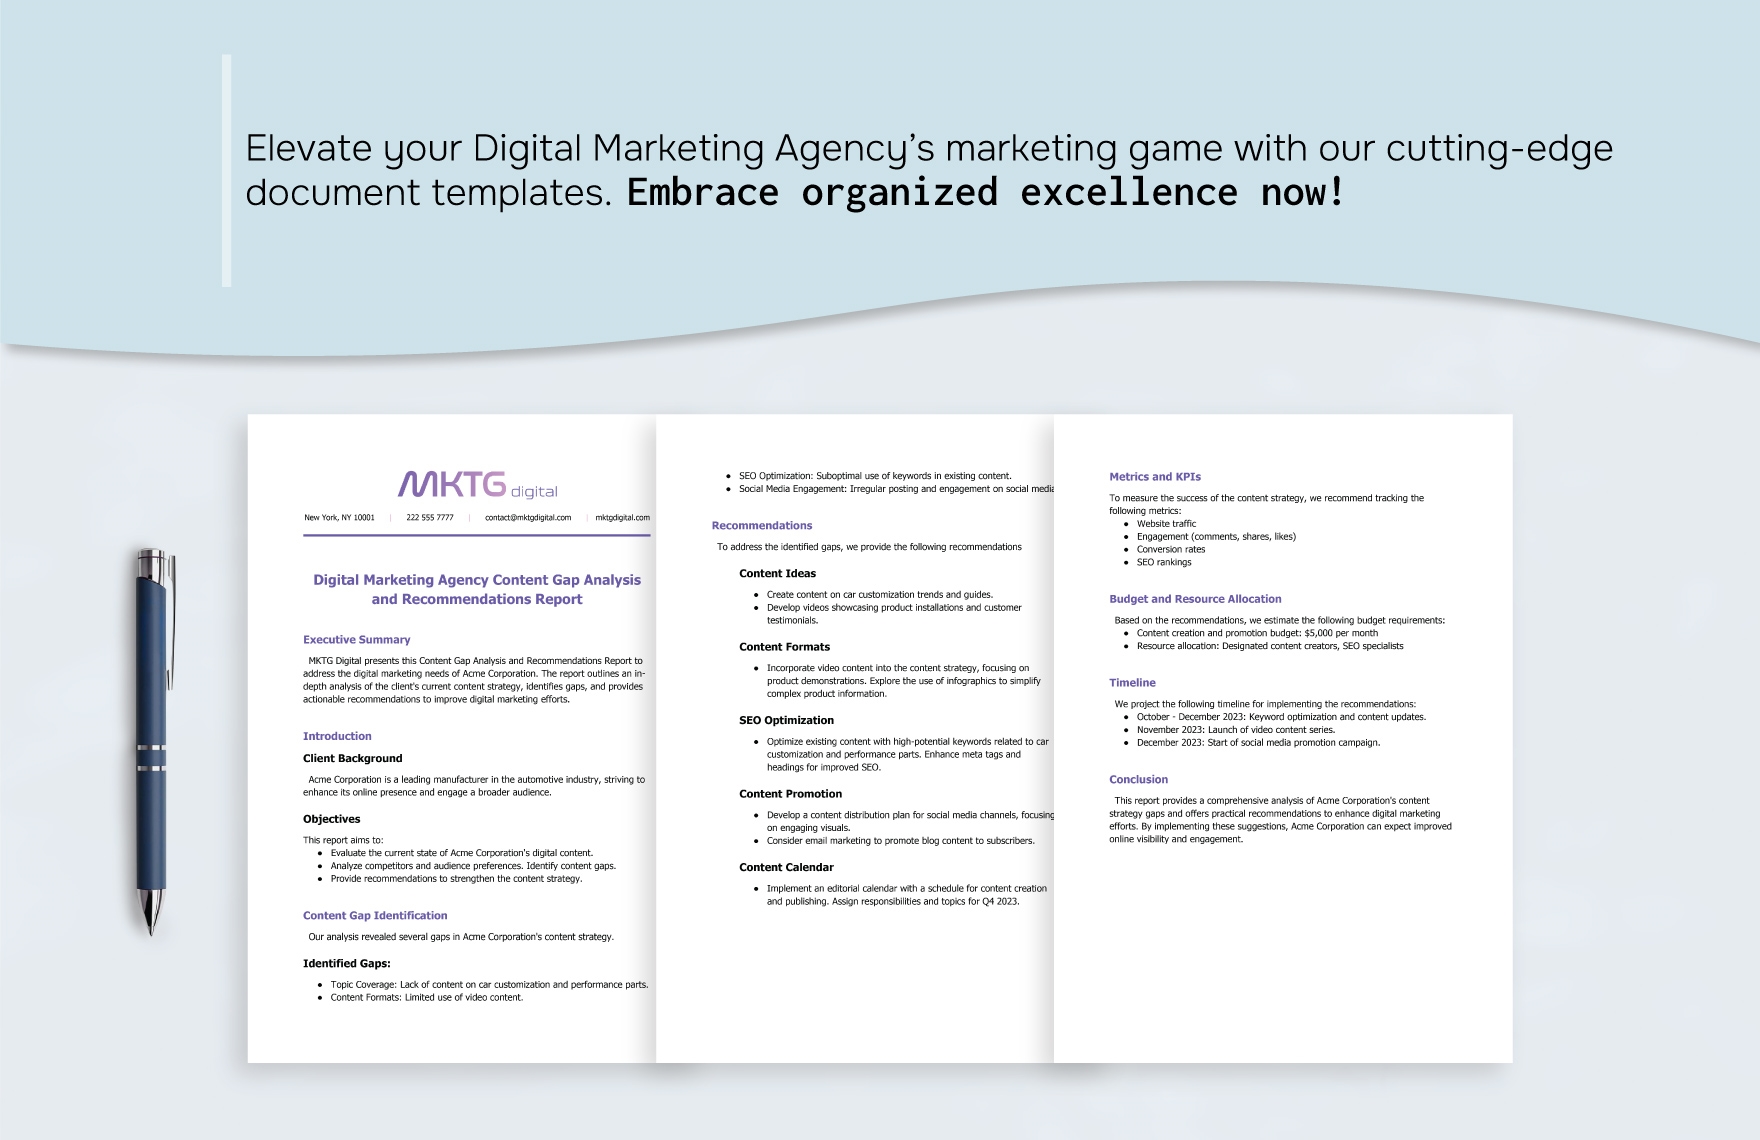 Digital Marketing Agency Content Gap Analysis and Recommendations Report Template